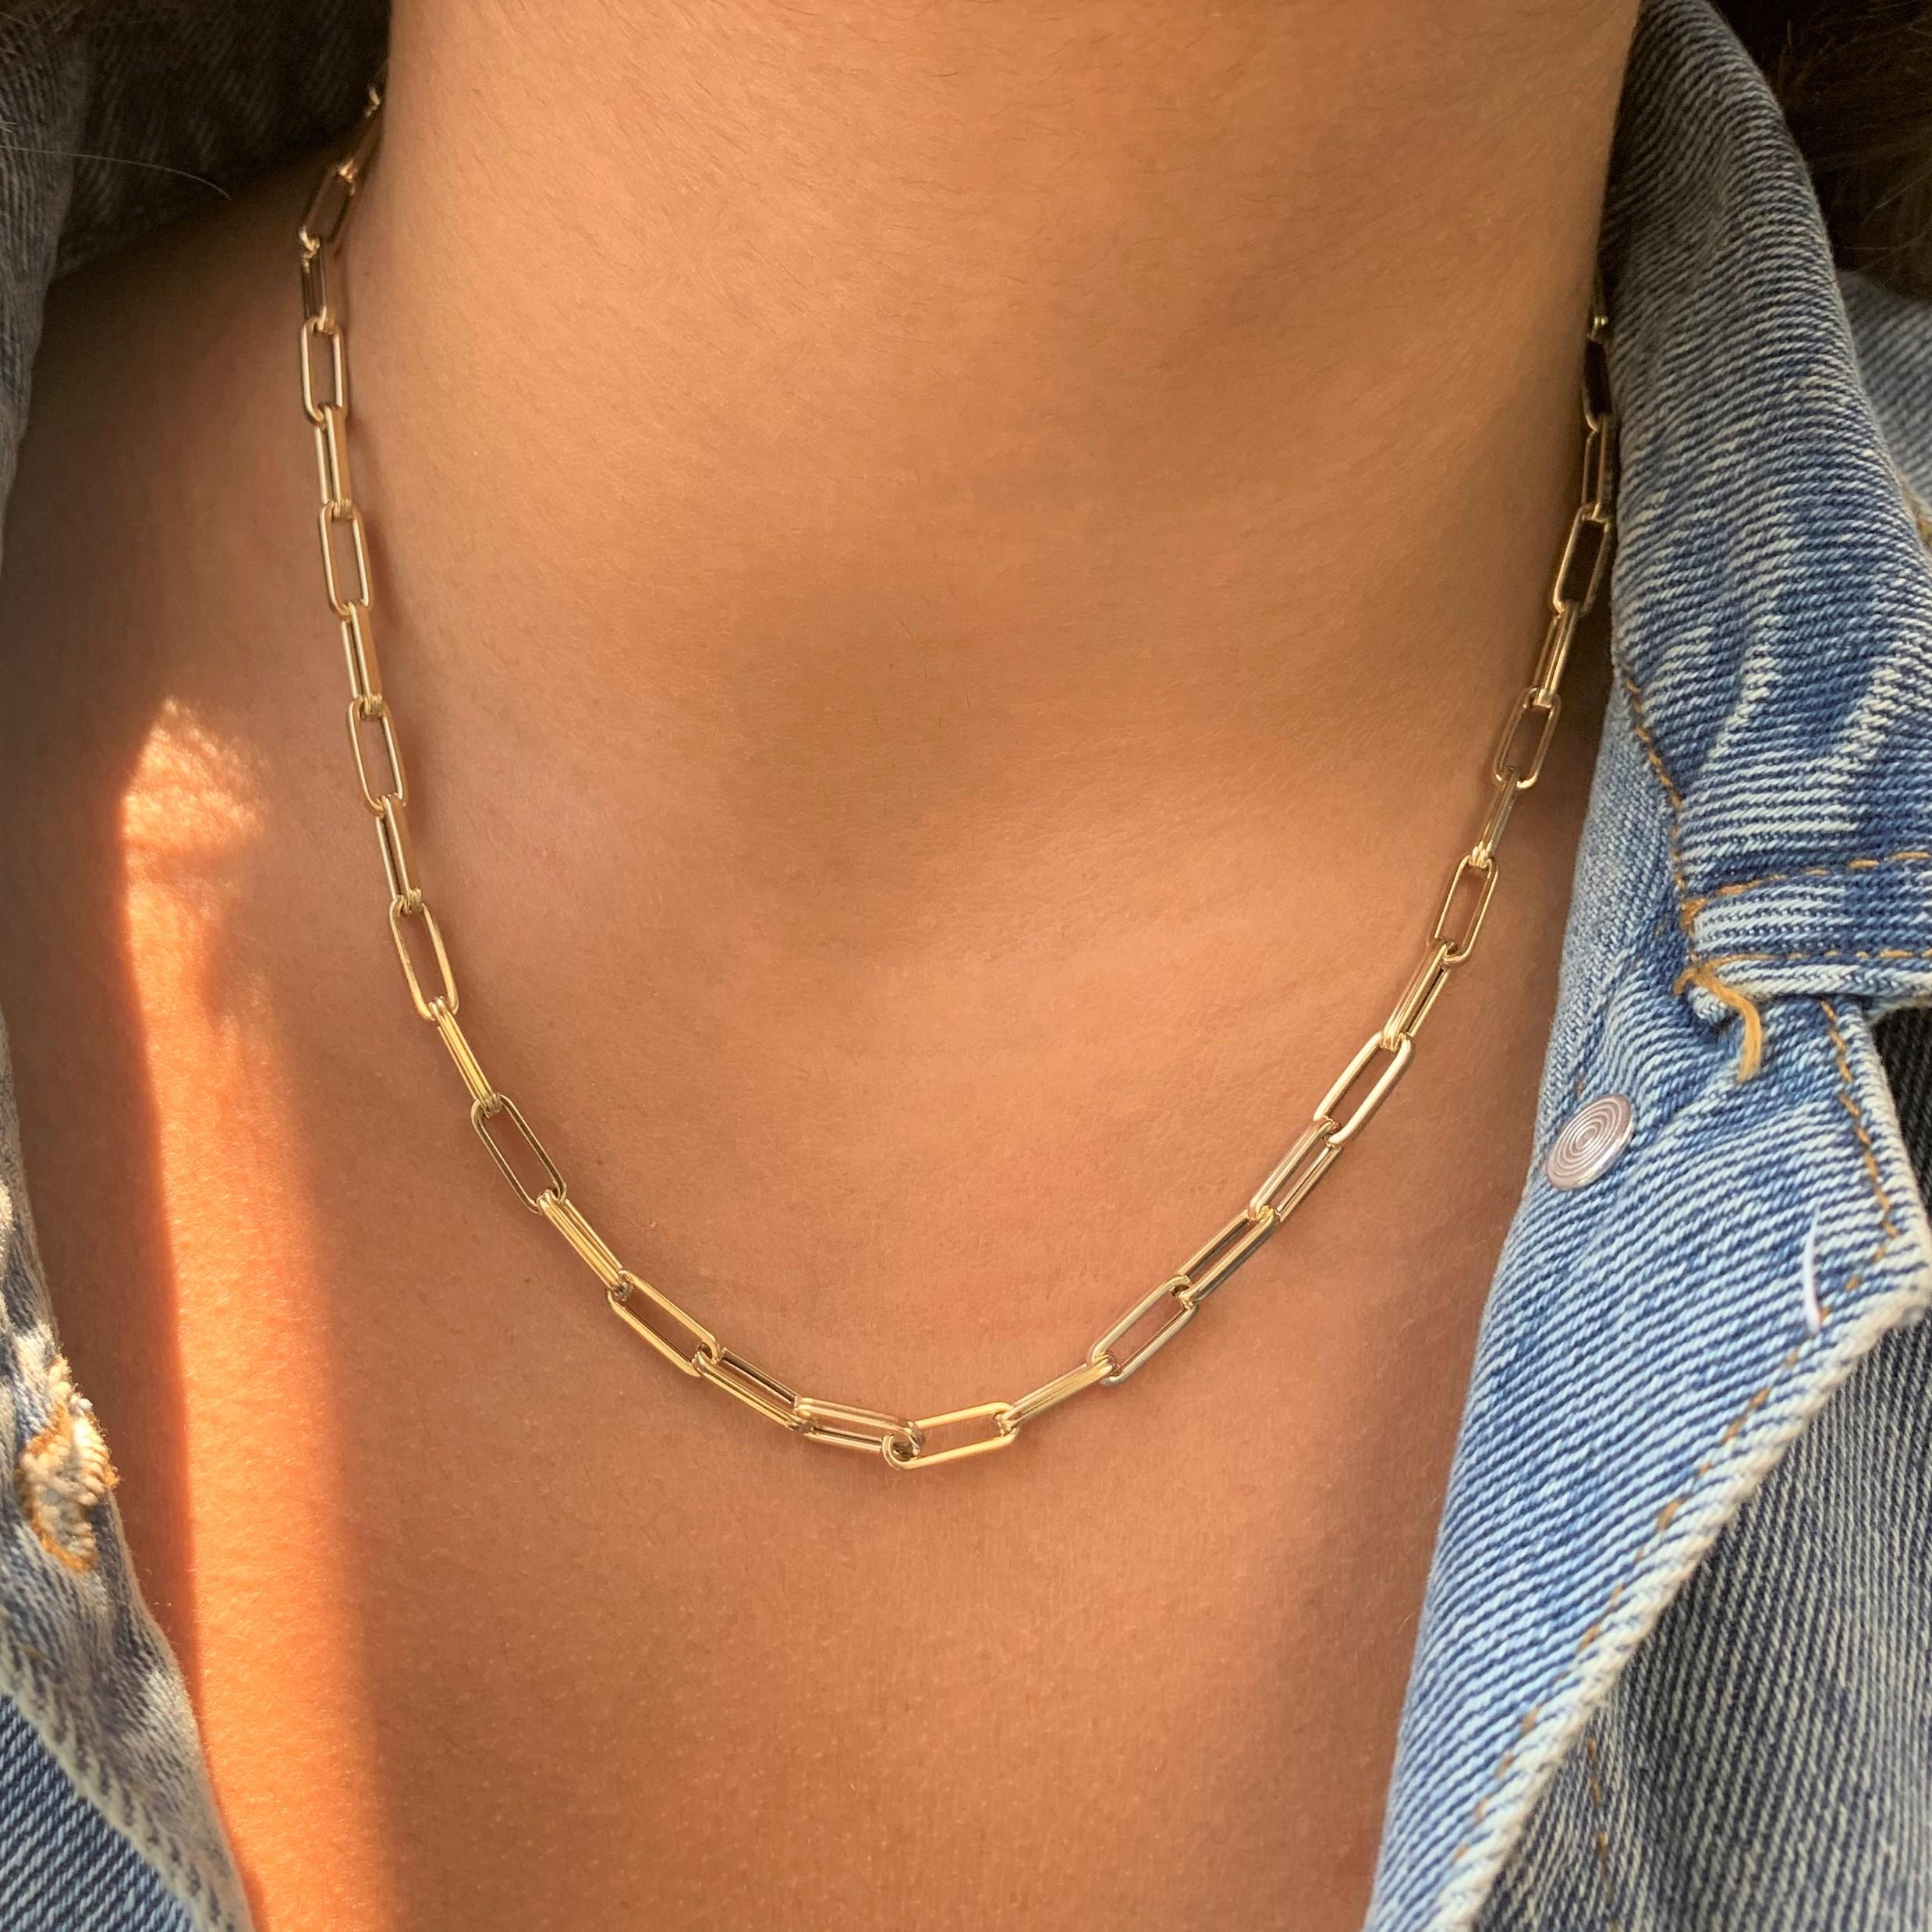 These Classic yet Trendy Paperclip Gold necklaces are a classic staple in any person's jewelry box! This 14K Yellow Gold paper-clip link chain is the perfect addition to your jewelry box. Buy one and wear it as a simple standalone with or without a